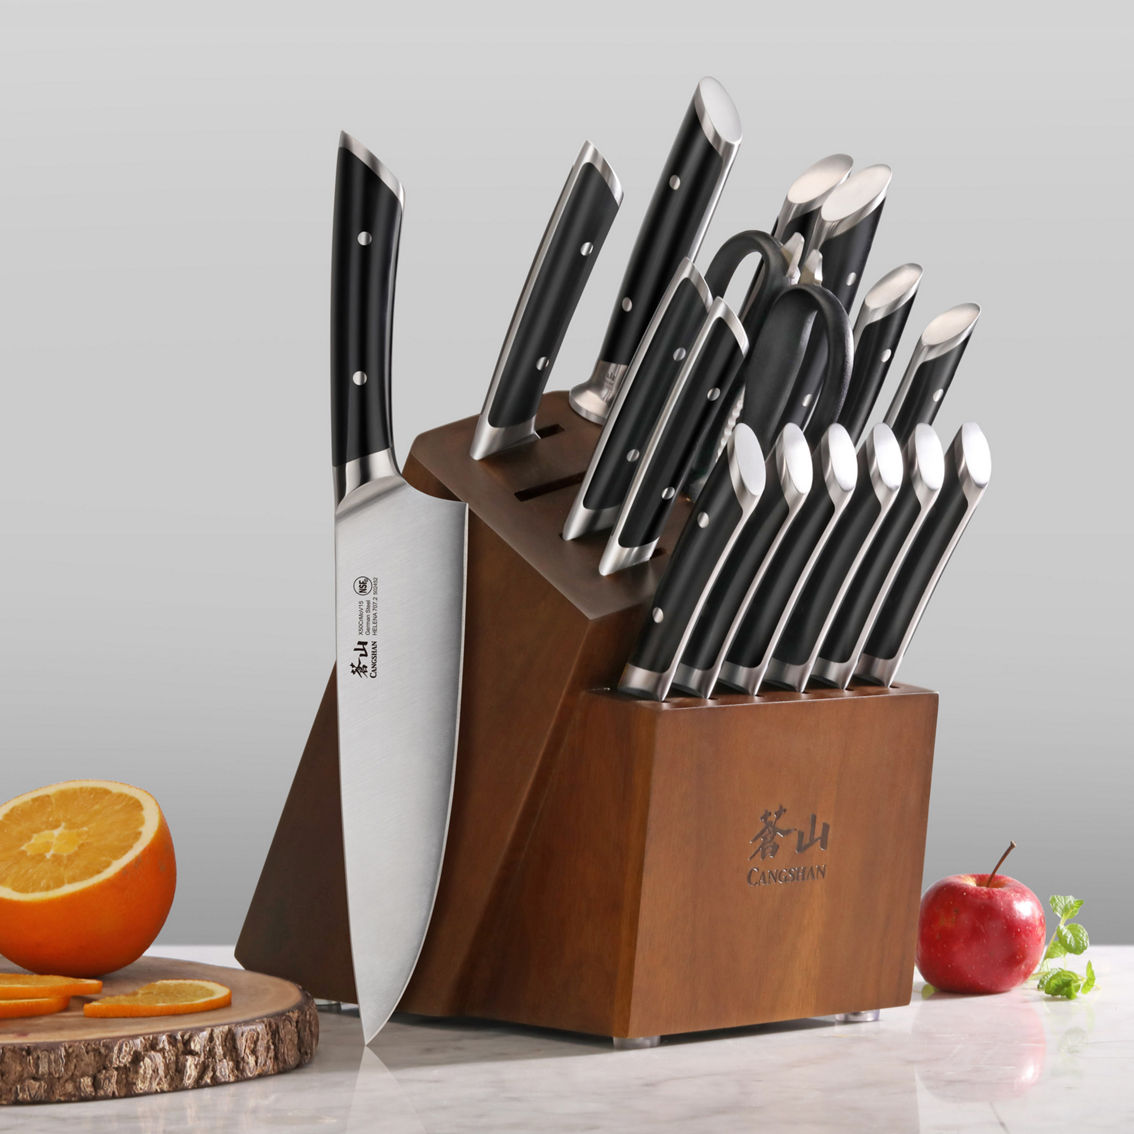 Cangshan Cutlery Helena Series Black 17 pc. Forged Knife Block Set - Image 3 of 6